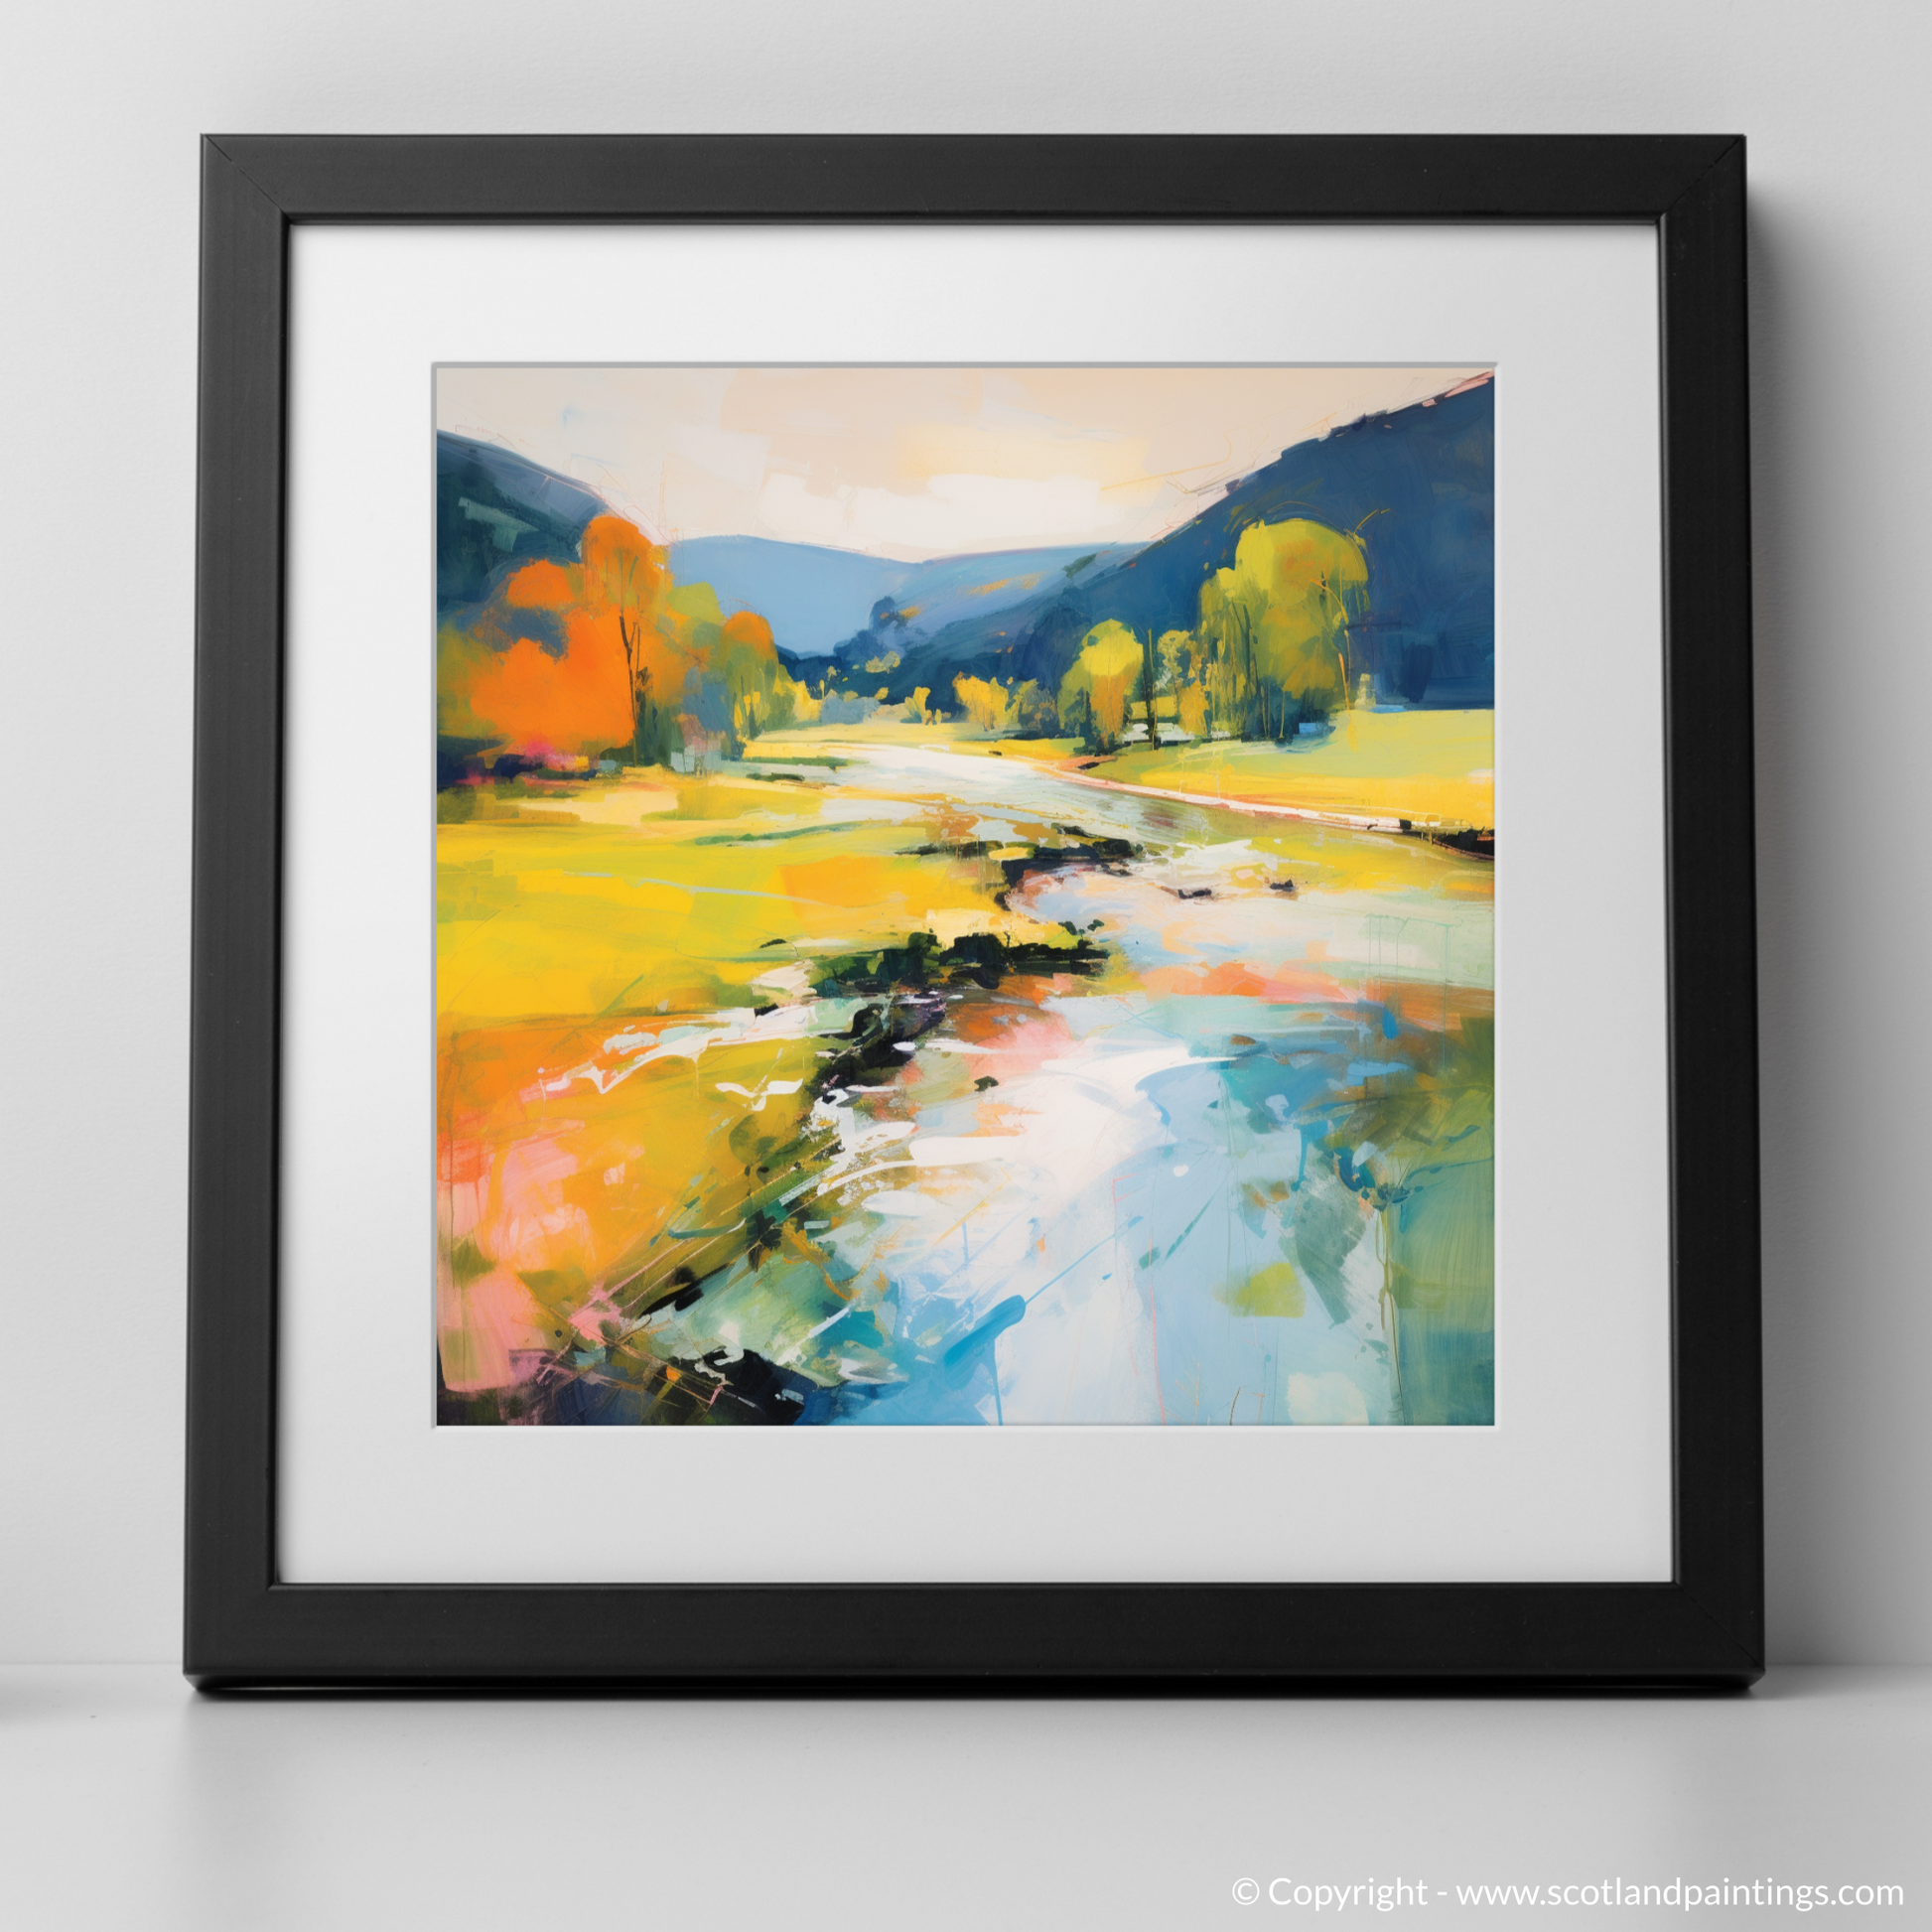 Art Print of River Earn, Perthshire in summer with a black frame